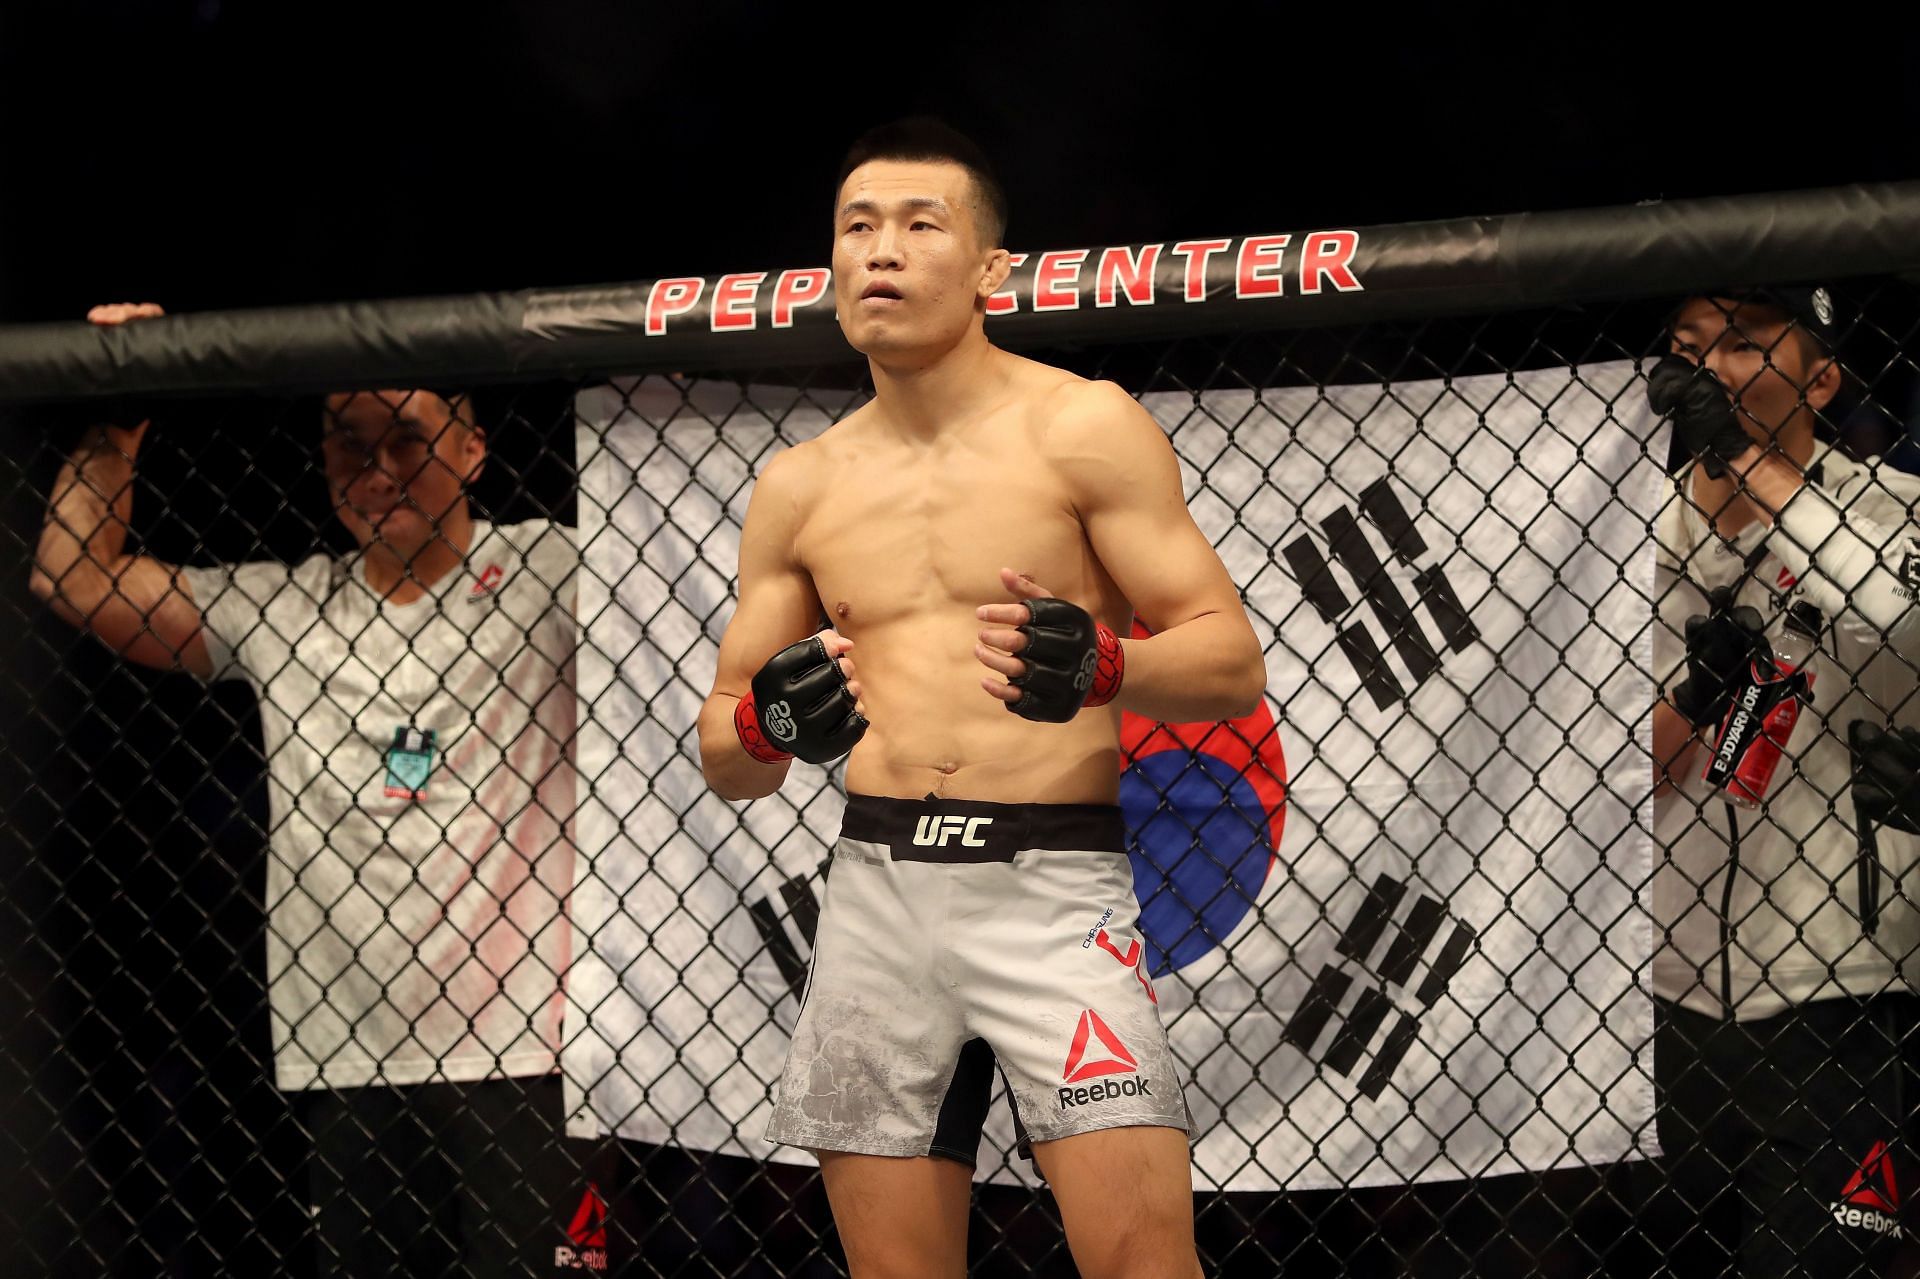 Chan Sung Jung could be a big step up for Movsar Evloev